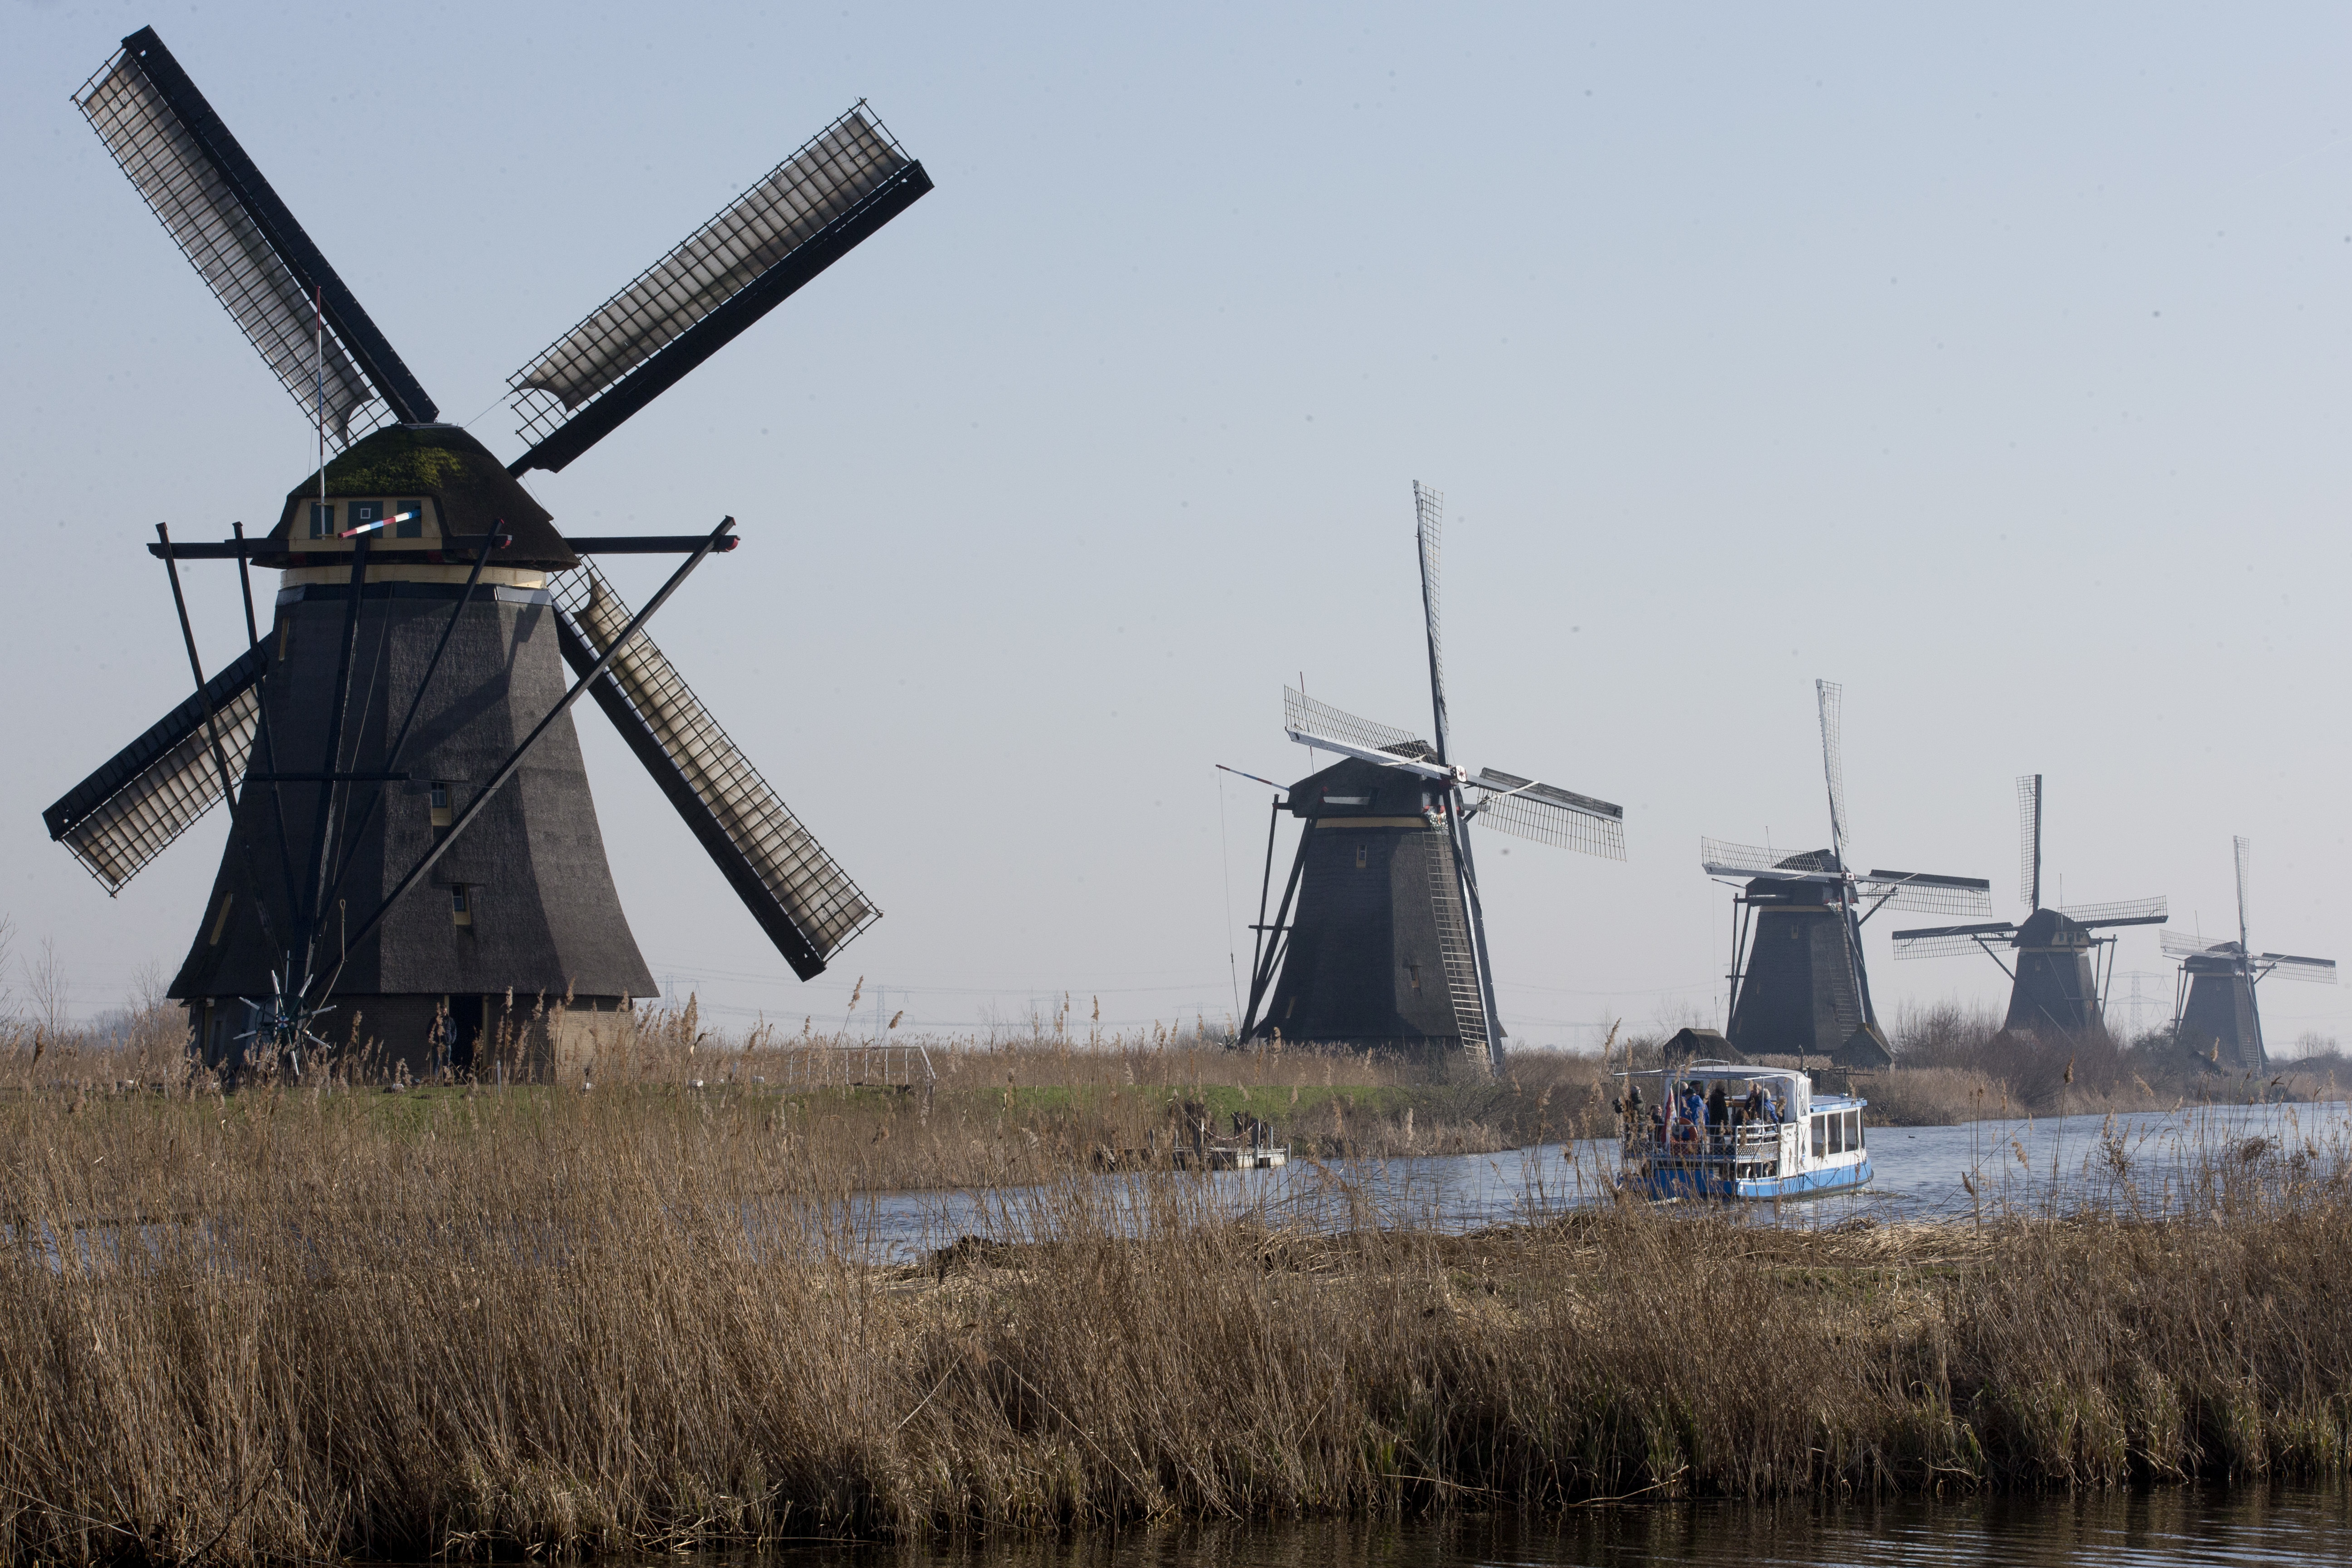 The Kinderdijk windmills are a must-see on any trip to Holland